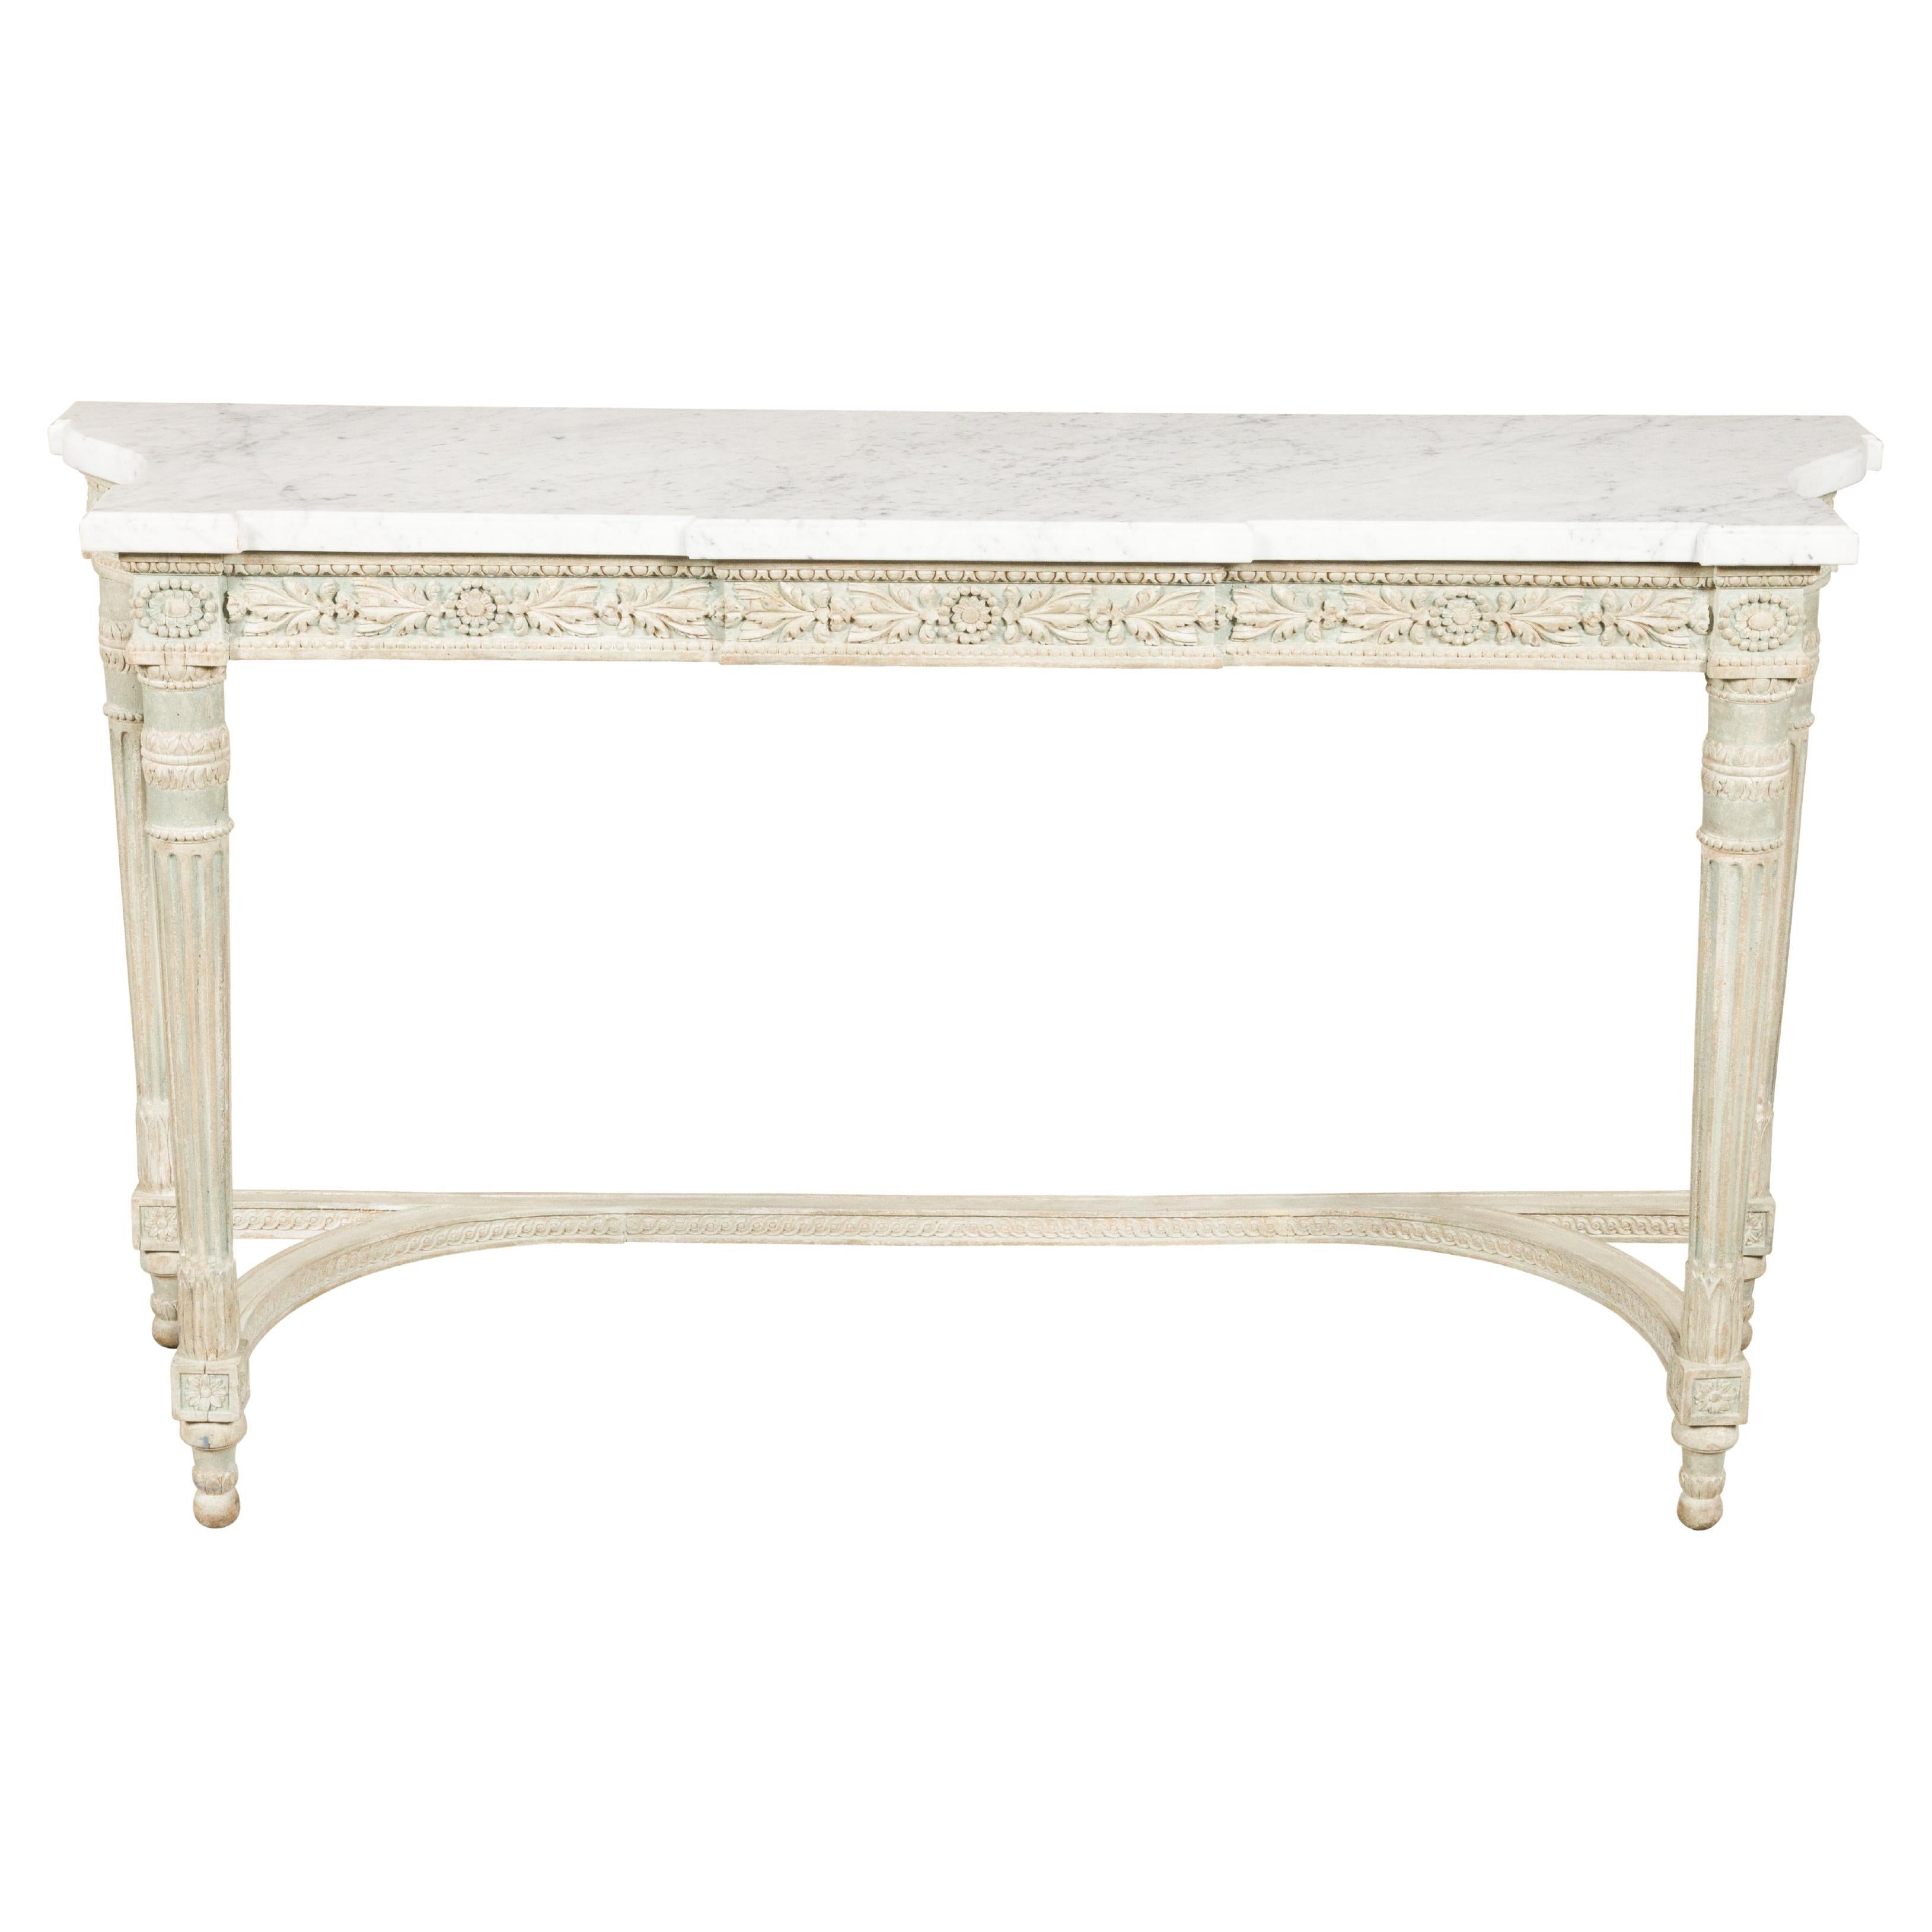 French 19th Century Painted Console Table with Carved Apron and White Marble Top